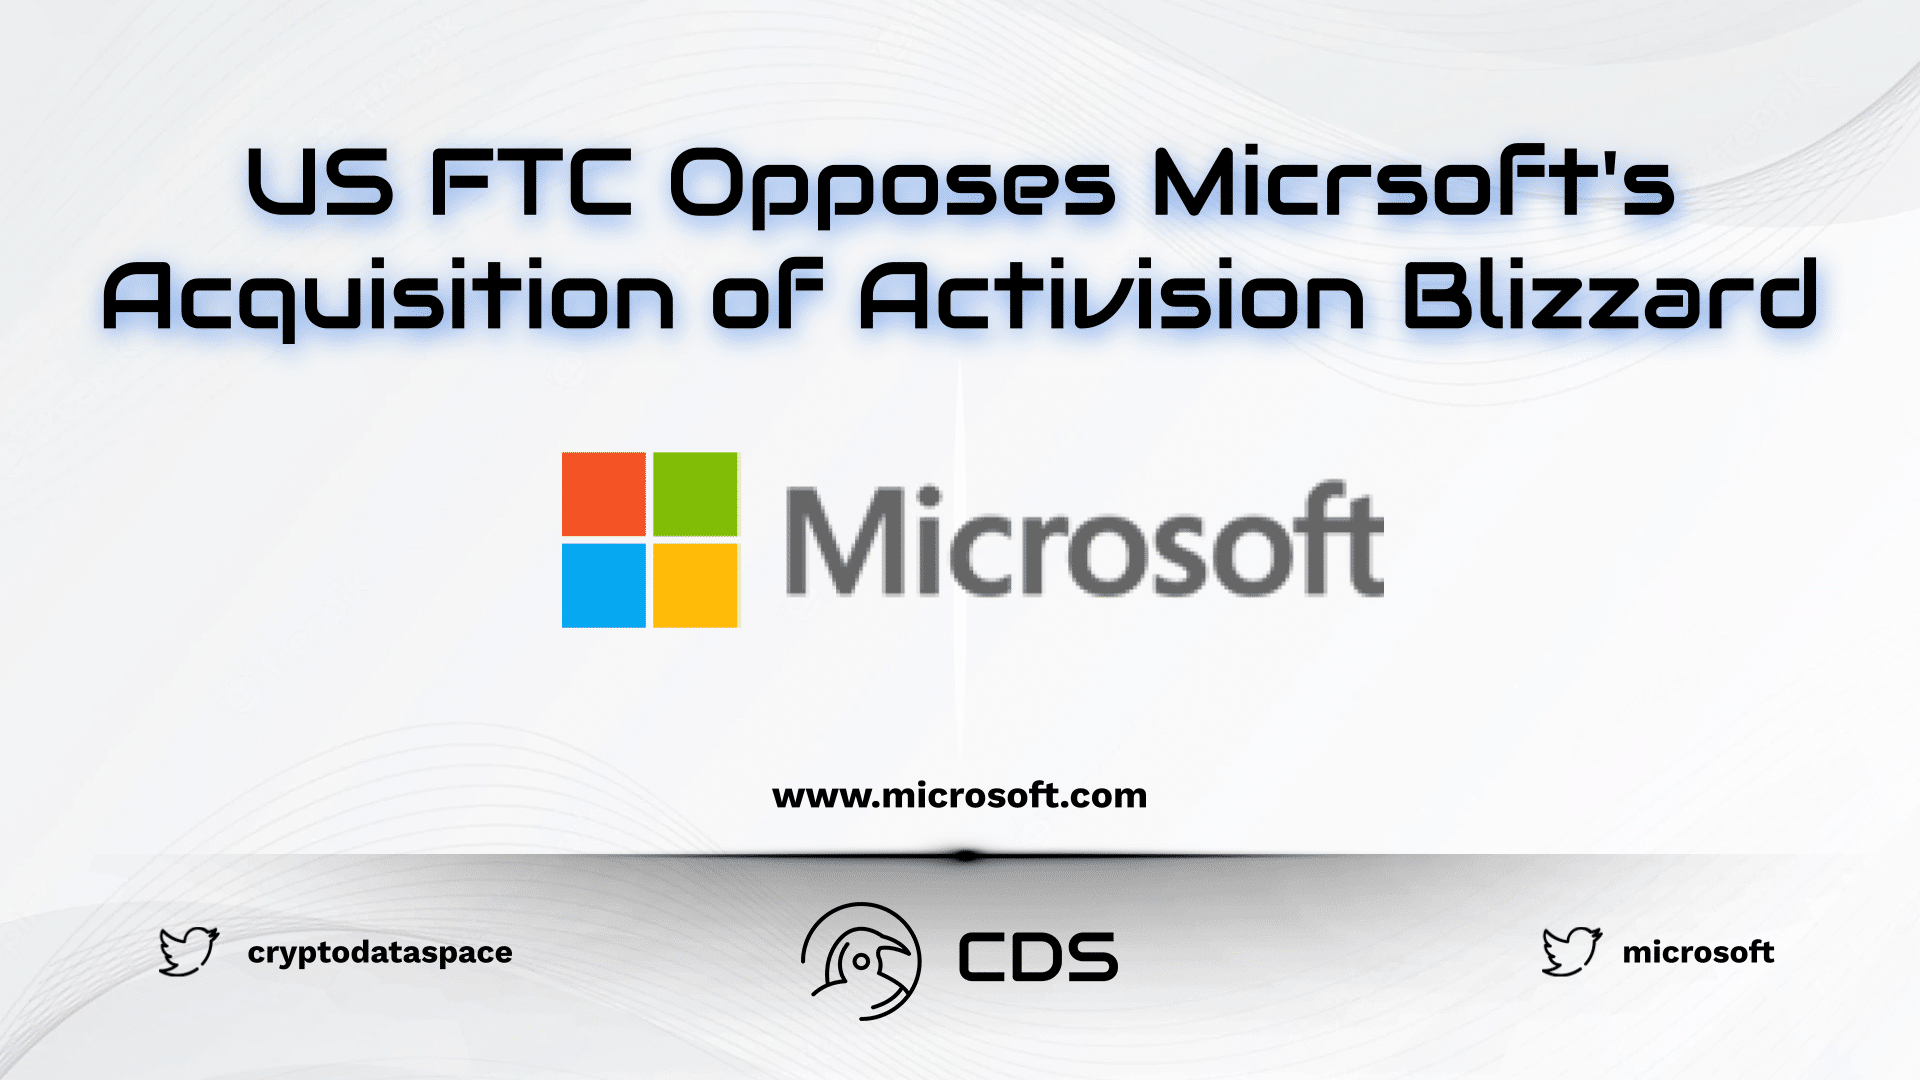 US FTC Opposes Micrsoft's Acquisition of Activision Blizzard